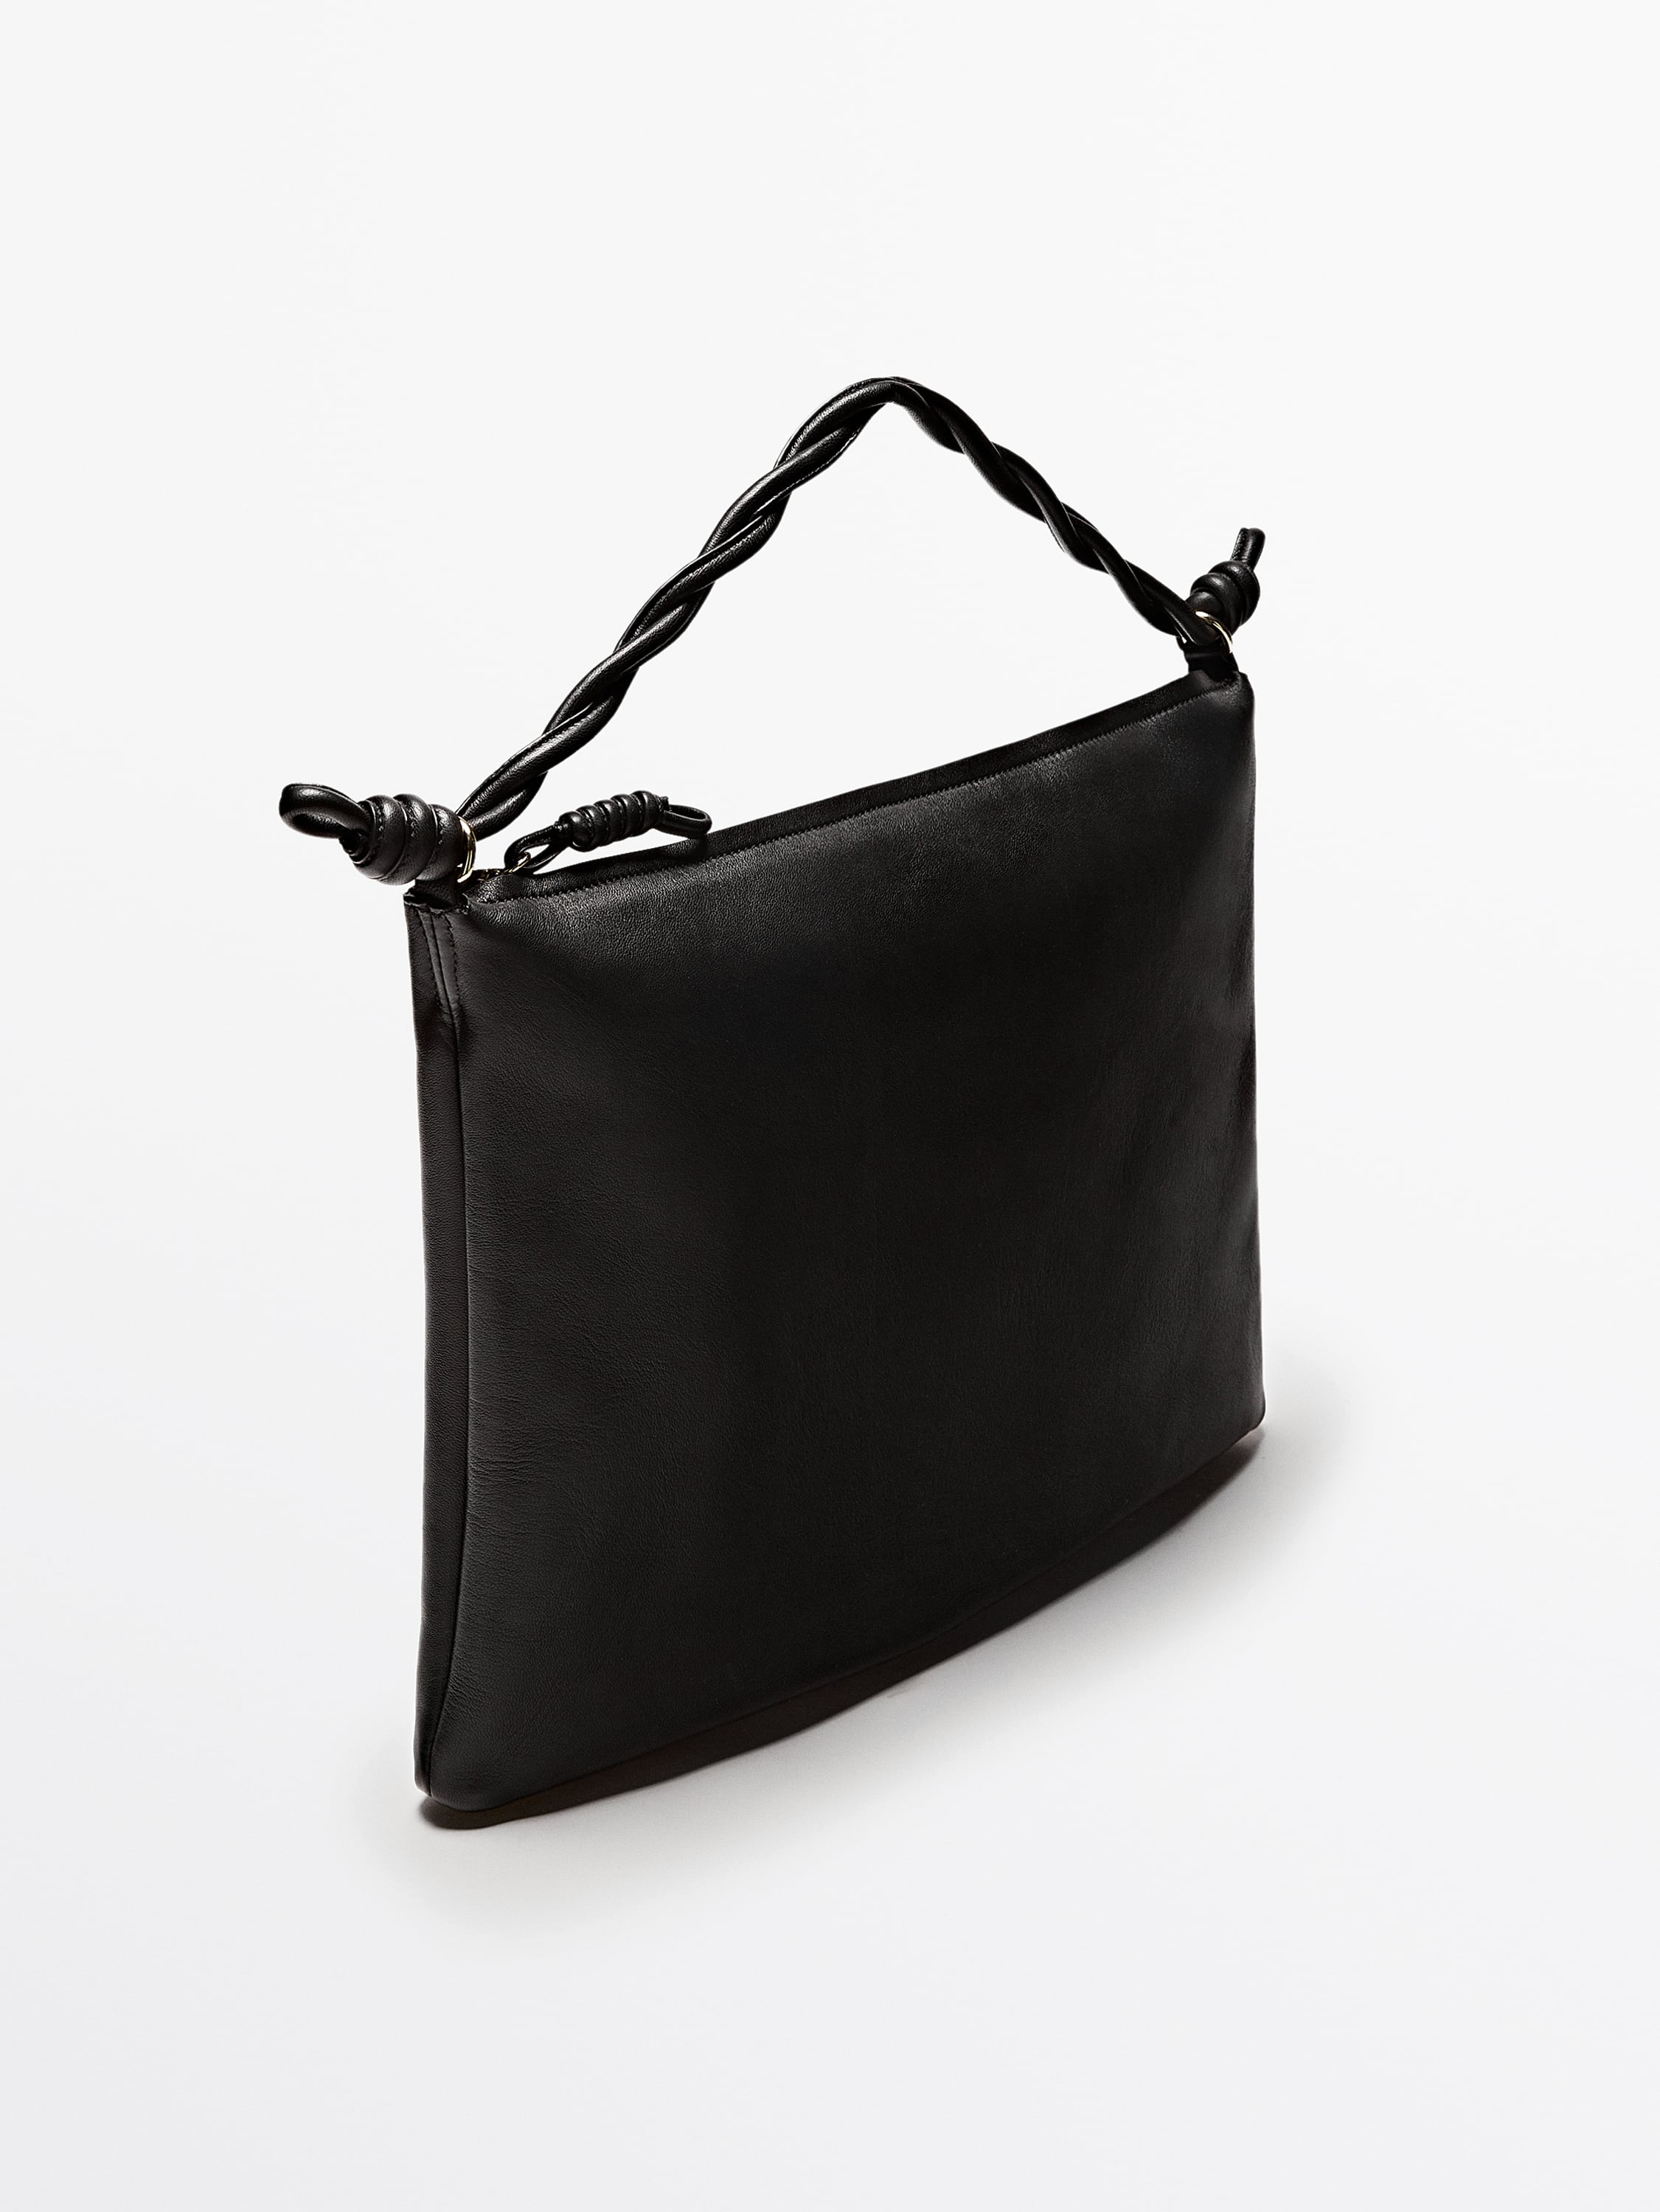 Nappa leather shoulder bag with knot detail